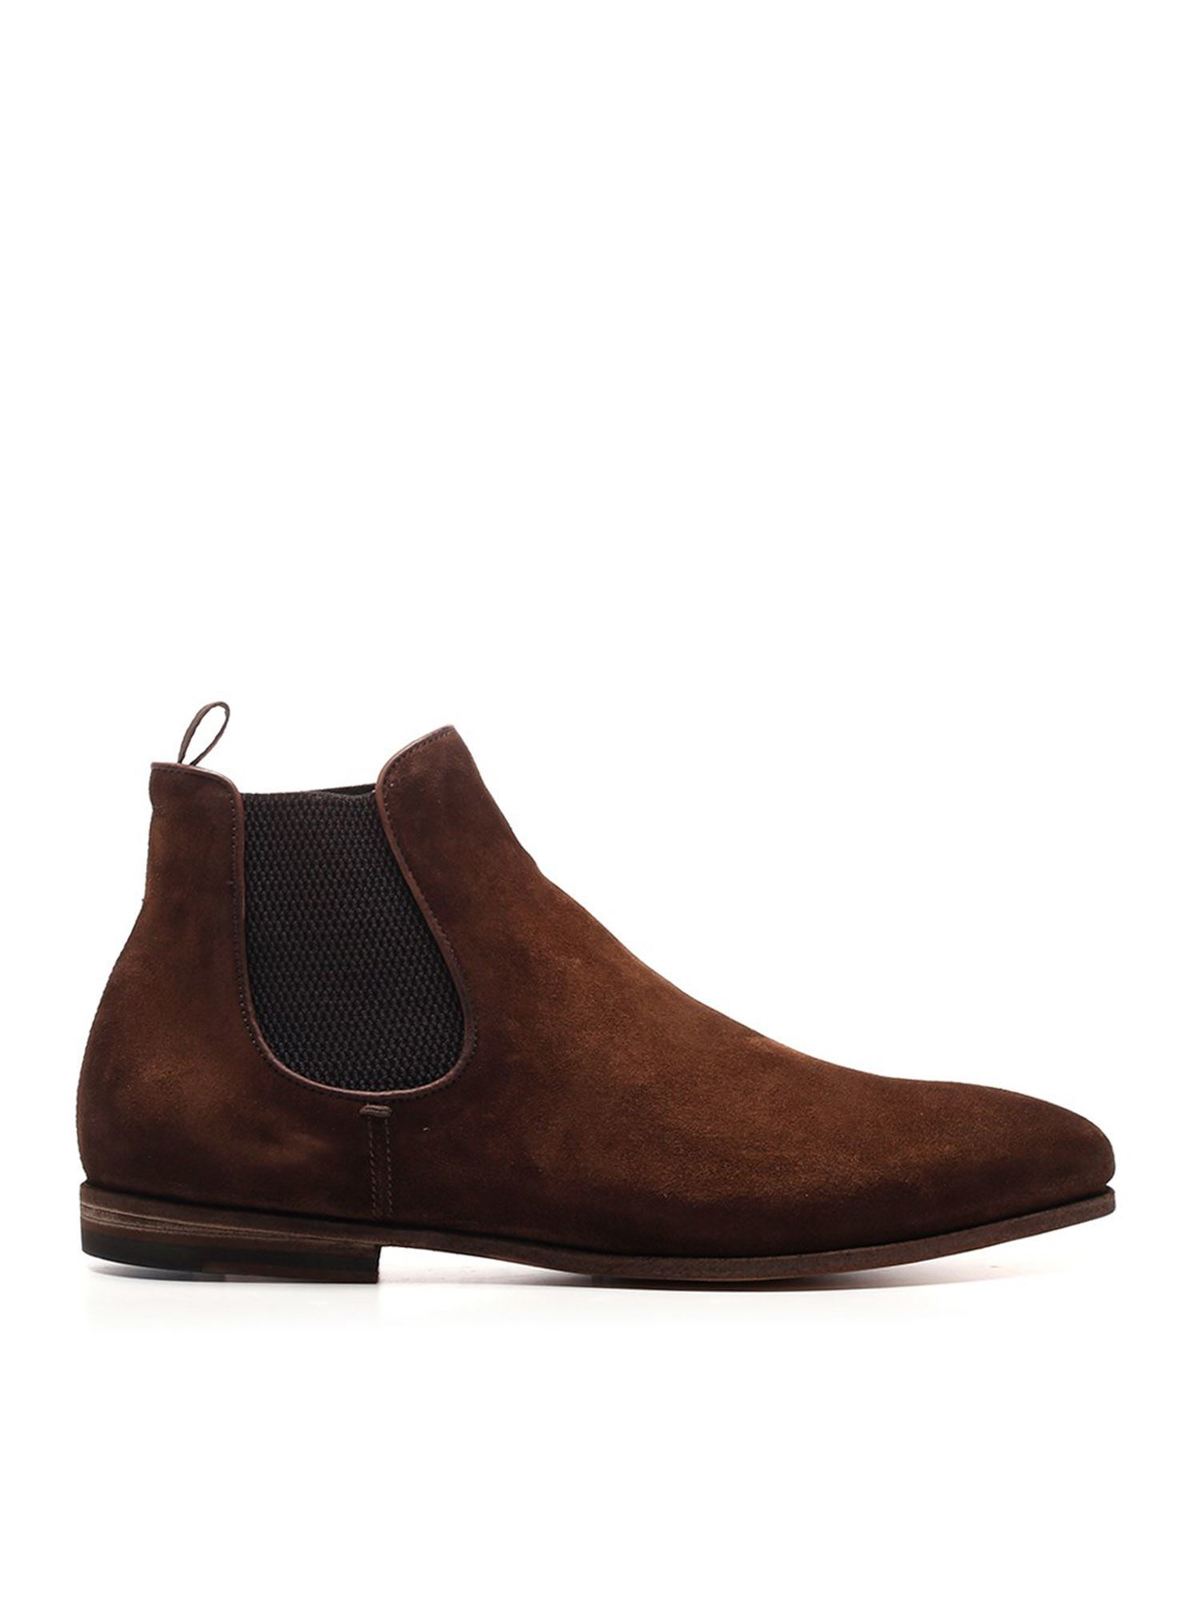 OFFICINE CREATIVE CHELSEA BOOTS IN BROWN